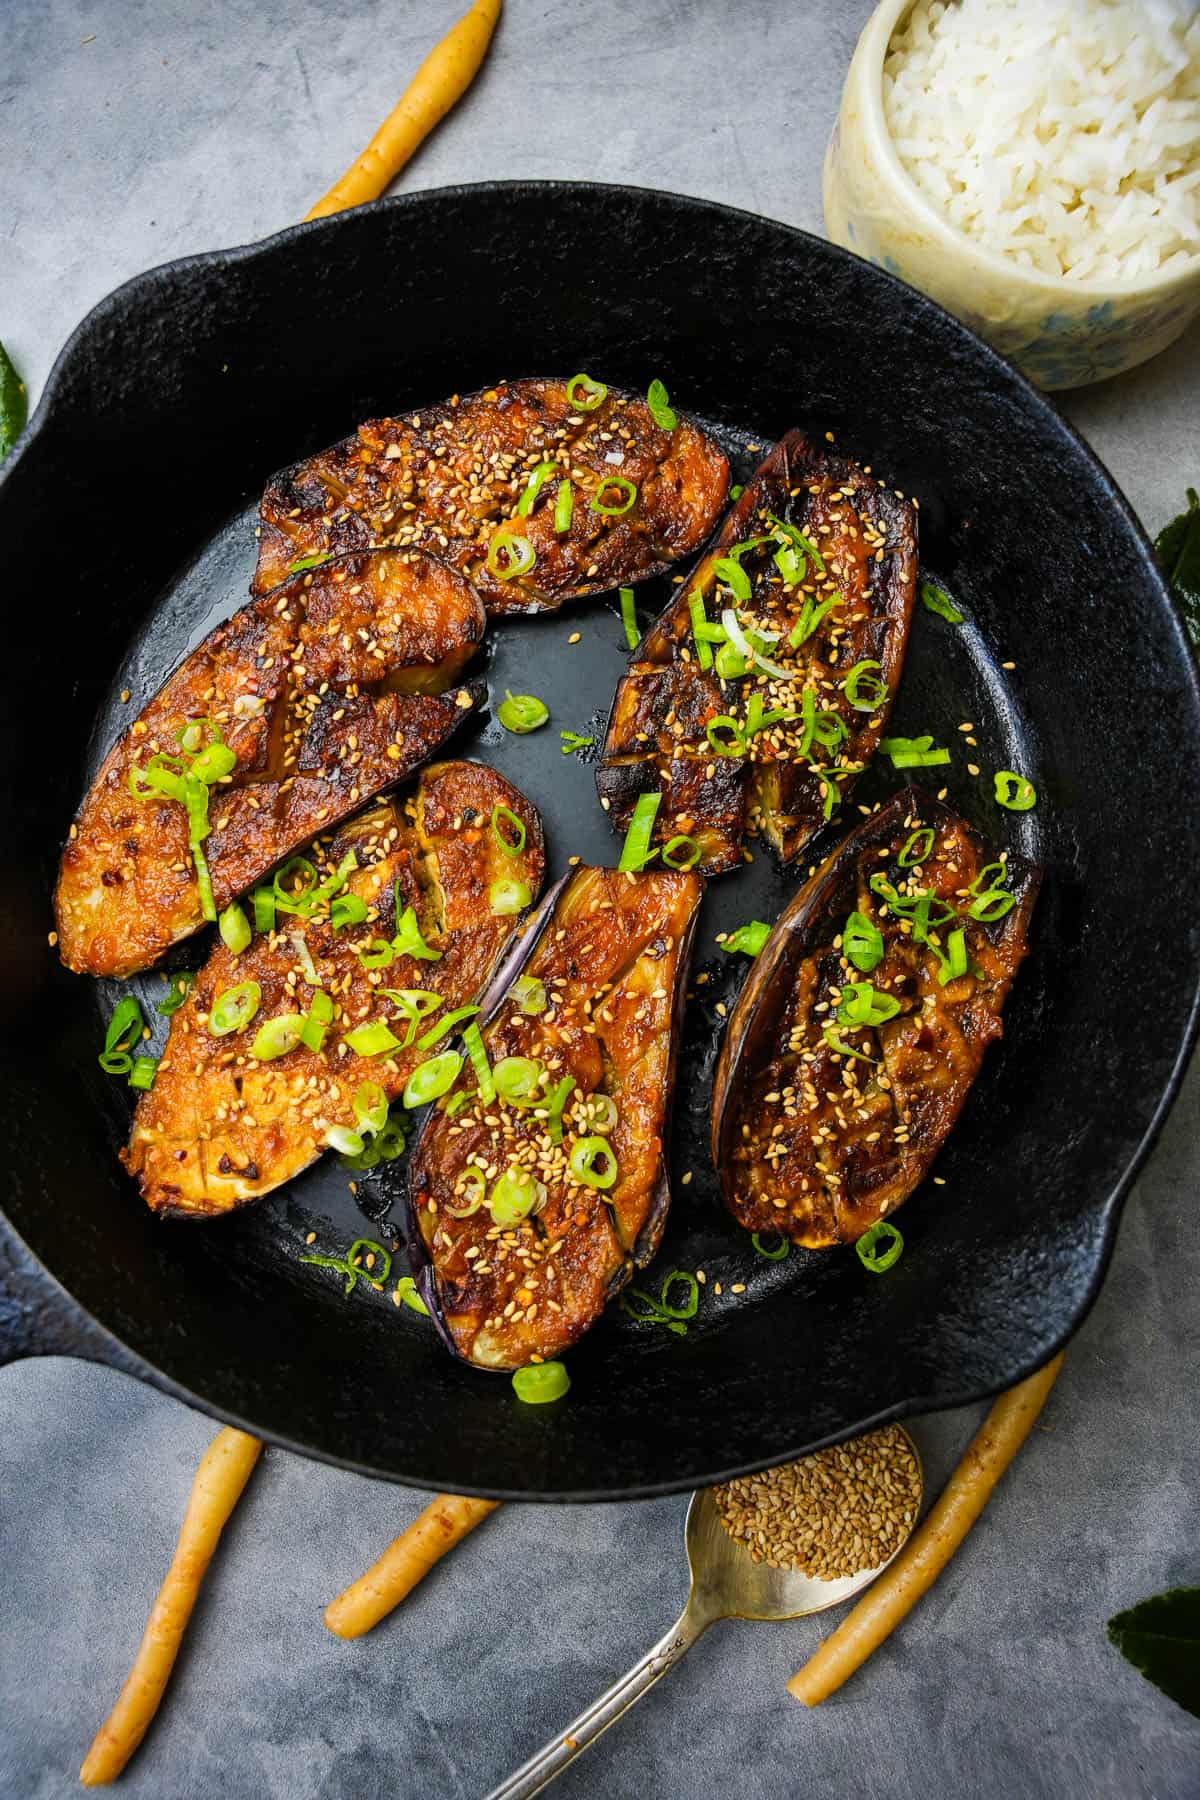 Miso glazed eggplant in a skillet with rice and green onions. Yamagobo and sesame seeds are on the counter top.